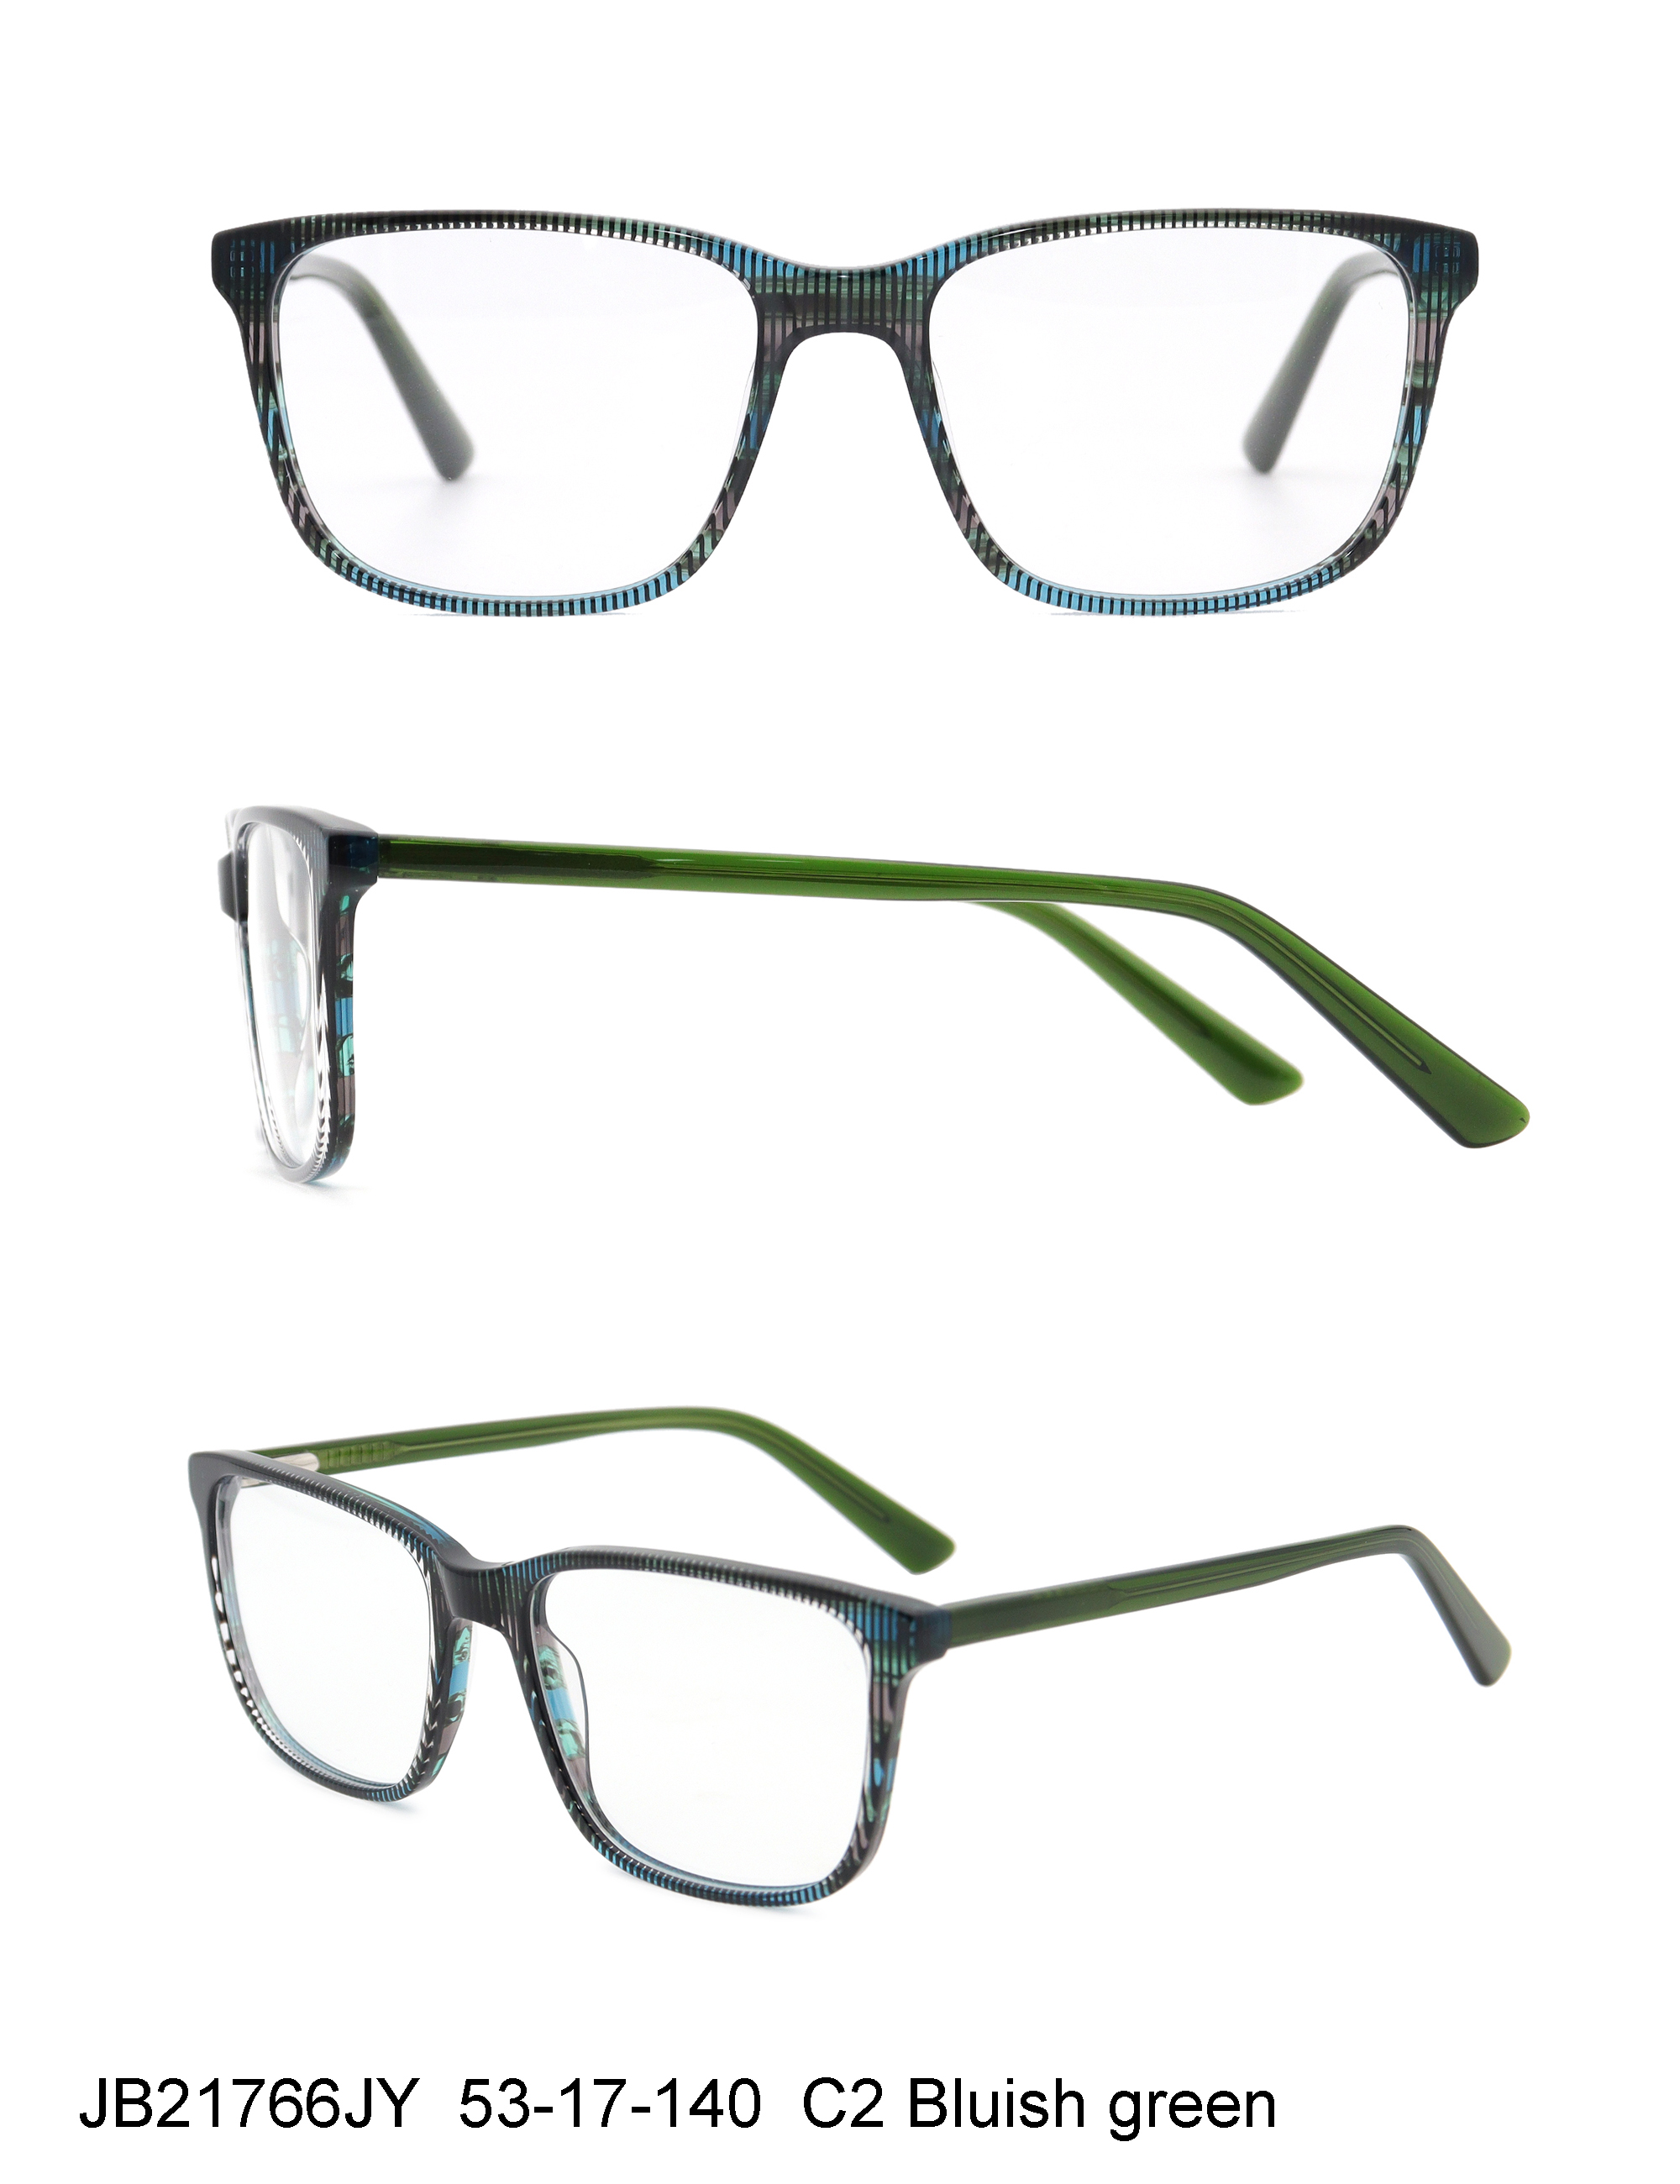 Beautifully crafted rectangle stripe shape glasses